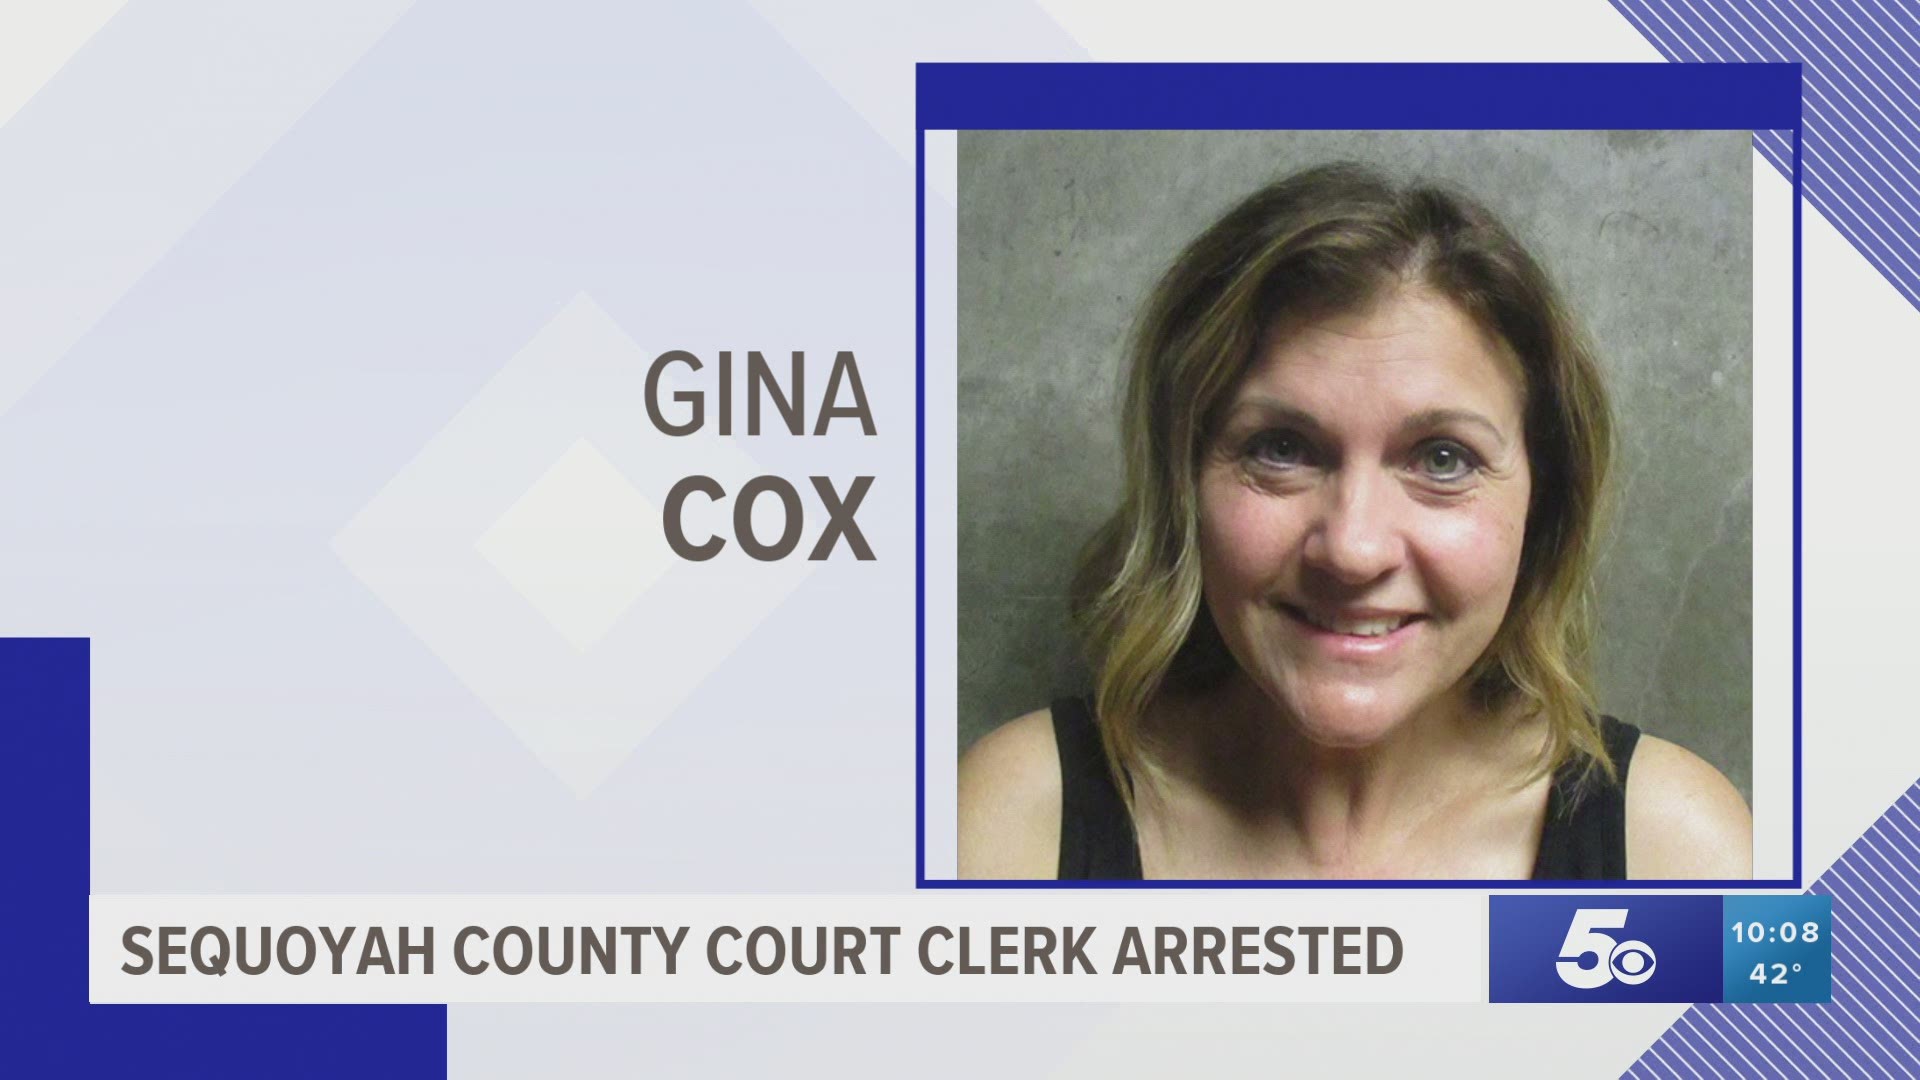 Sequoyah County Court Clerk arrested for public intoxication